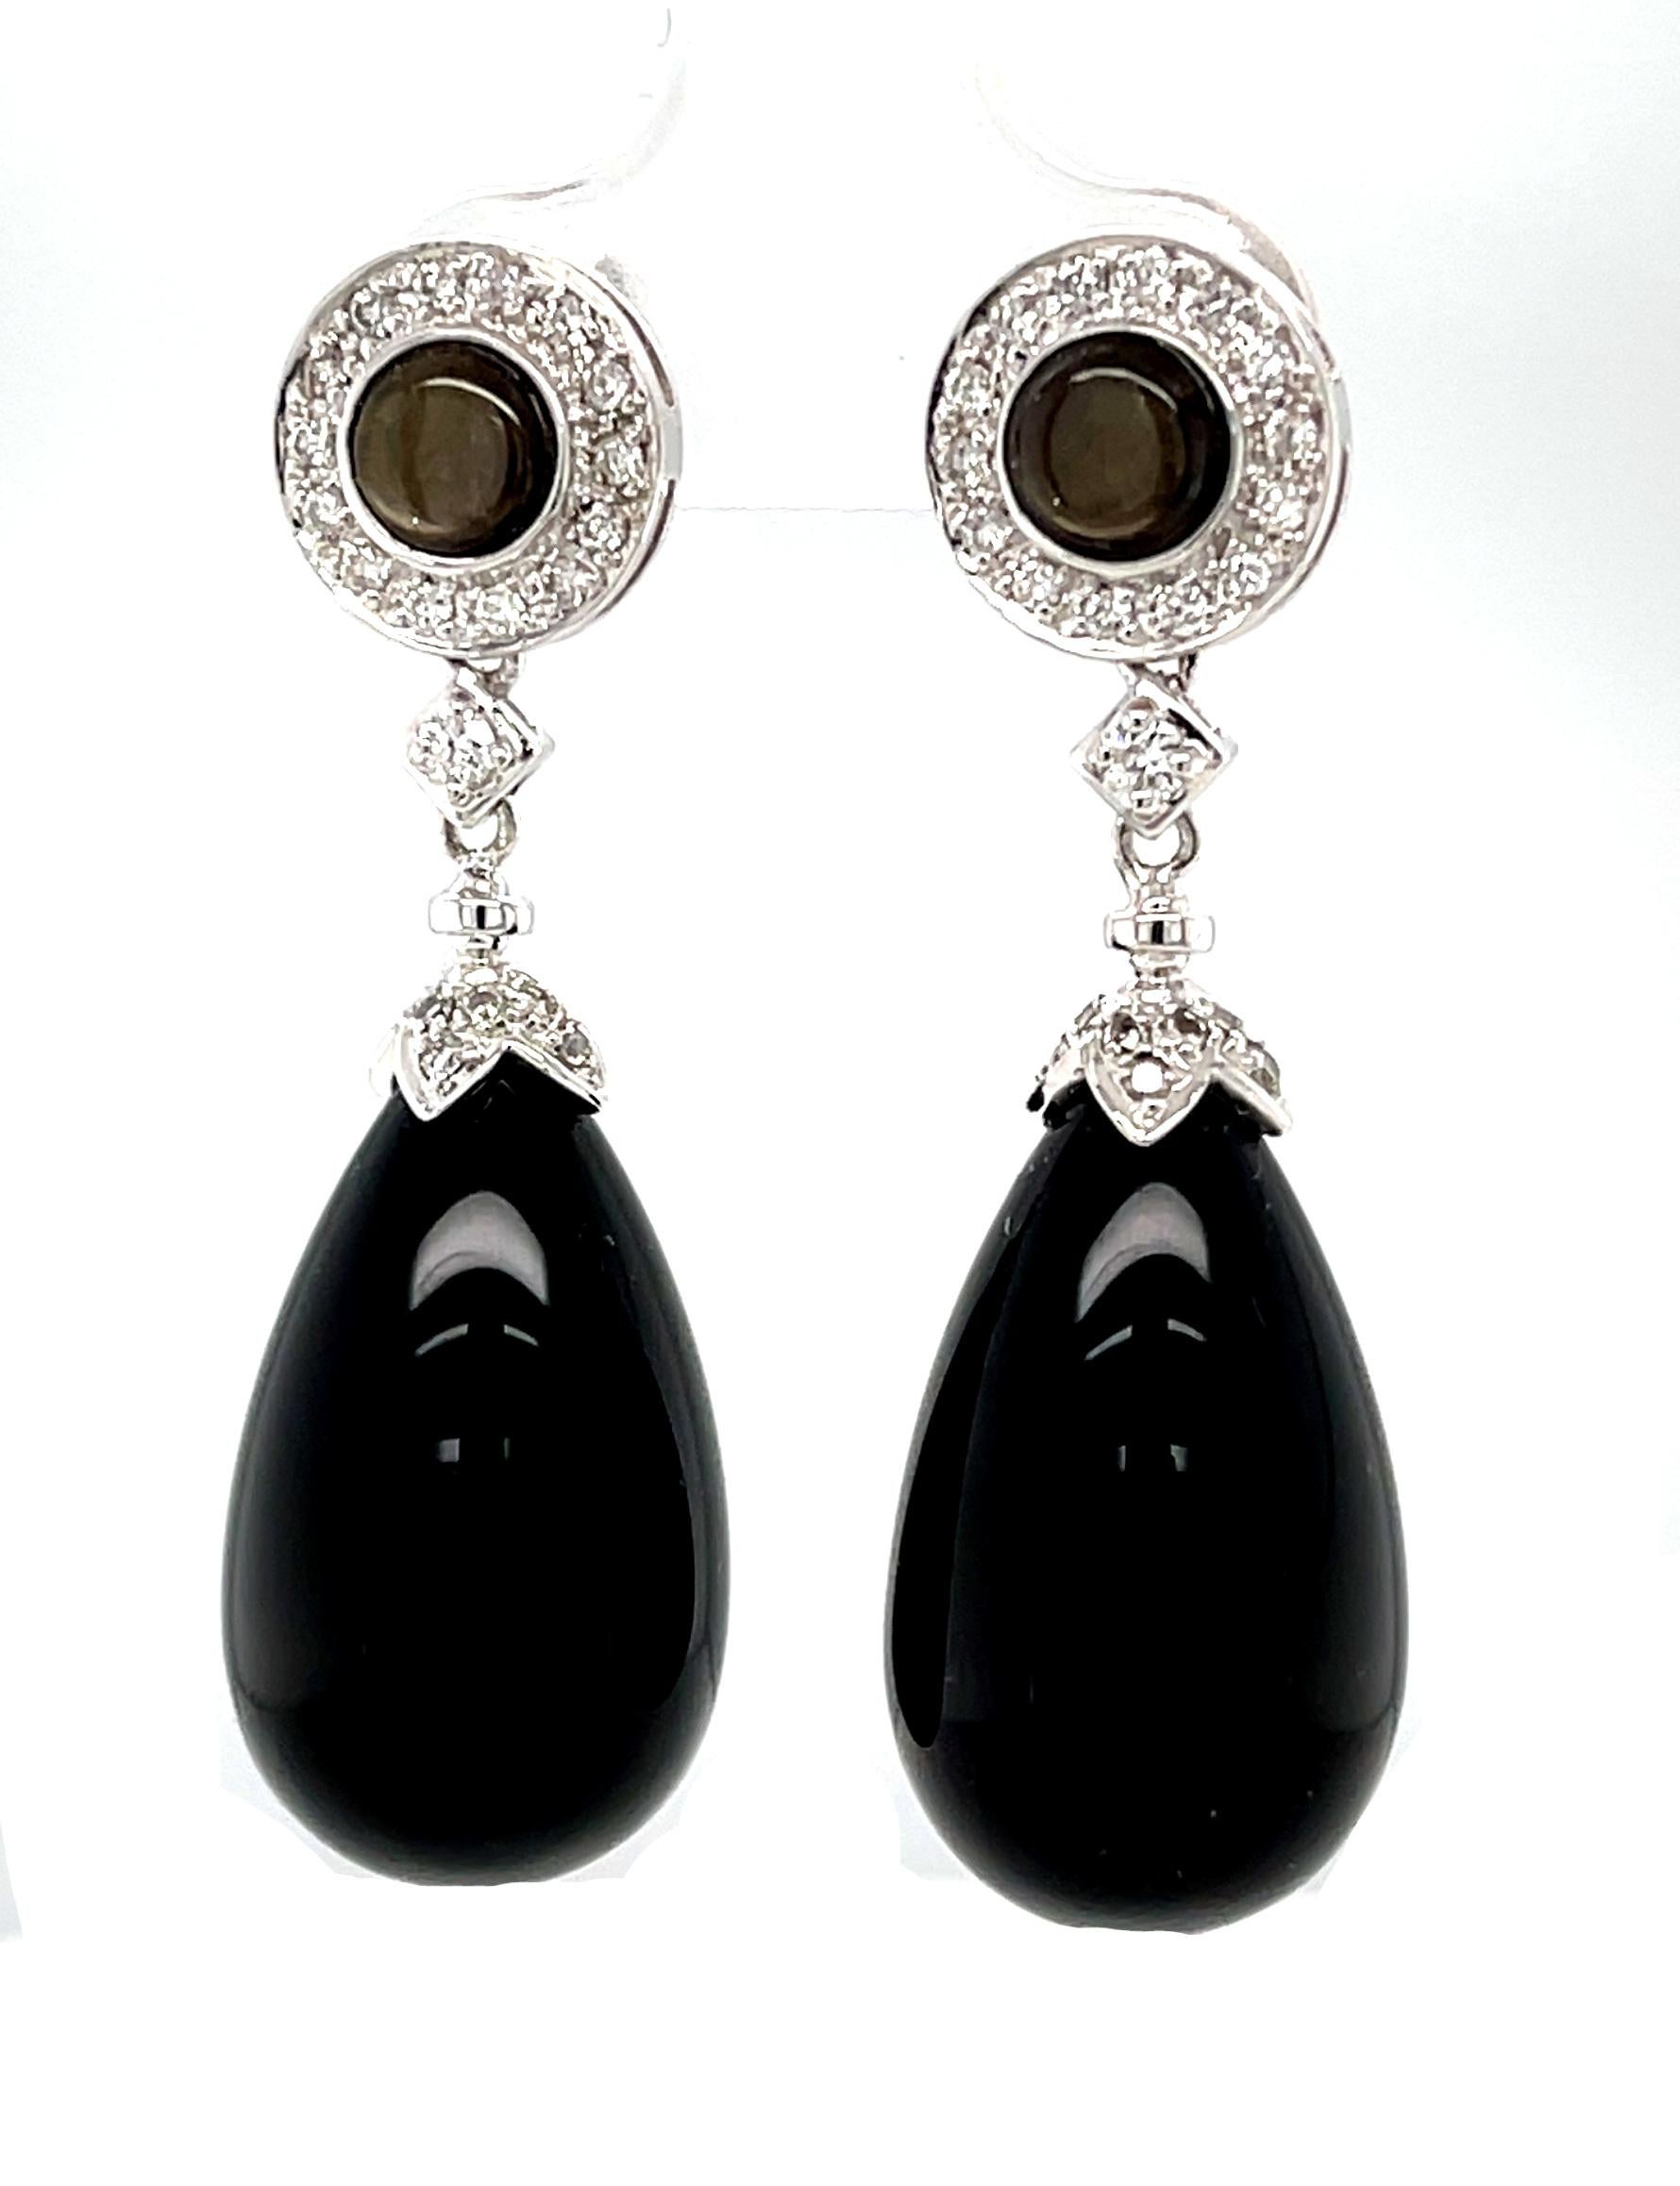 Black onyx pendalogues are topped with tiny diamonds and suspended from black star sapphires in these elegant white gold dangle earrings. The black star sapphires are encircled with diamonds making a striking combination of colors, shapes and